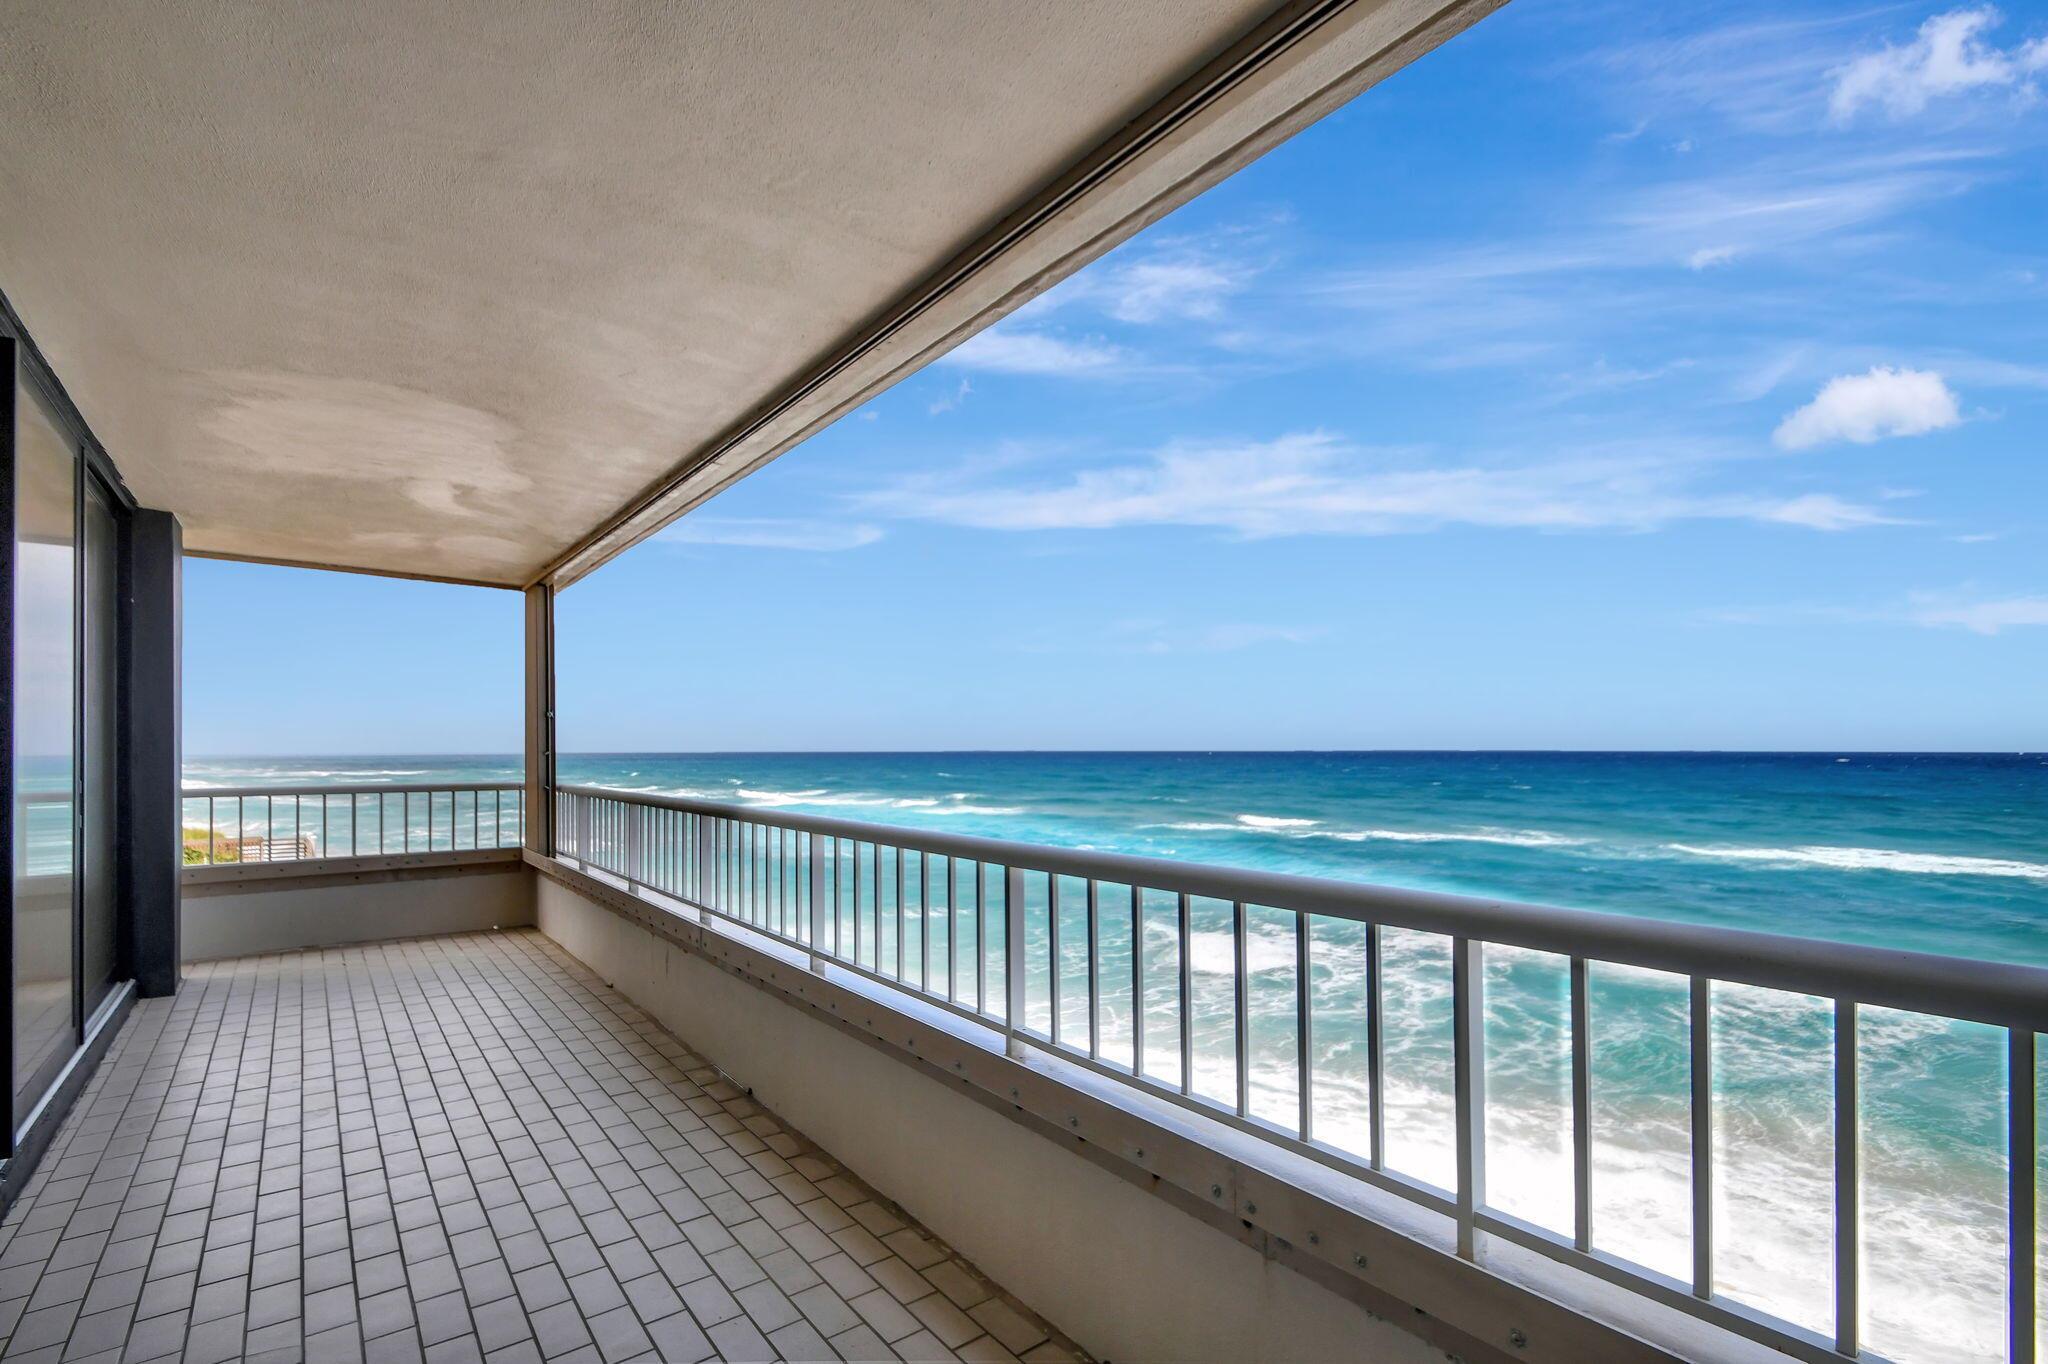 Extraordinary Direct Ocean & Beach views to the East and wide Intracoastal in the West. This completely remodeled unit has white impact windows throughout, Sub-Zero refrigerator, full-size wine cooler, Wolf cooktop & oven, with a Bosh dishwasher. The open kitchen has a large island with stunning water-fall quartz countertop. Electric blinds on all of the large windows. From this large two bedroom two and a half bath, plus den, condominium that encompasses the whole south side of the building. In this beautiful condo with over 2000 square feet of living area and 800 plus square feet of wrap-around terrace, you are literally surrounded by glass. Enjoy every sunrise and every sunset from the three-sided wraparound terrace. Capri is an exclusive fourteen story tower with only 28 residences on the sandy beach of prestigious Singer Island offering stunning ocean, intracoastal &amp; city views. Each floor consists of two residences offering two bedrooms and two and a half baths plus separate Den with 2000 square feet of air-conditioned living space and an additional 800 square feet of wrap around terrace. Truly amazing panoramic water views can be seen from the balconies through all large floor to ceiling sliding doors. Amenities include a relaxing and protected pool deck surrounding the inviting pool and spa, his/her restrooms and saunas, a casual pool-side owner's lounge with fully equipped kitchen, private billiard lounge, exercise room with ocean view, fully equipped kids' playroom, tennis court, private gated entrance, garage parking, extra storage, private beach access and two small pet allowed.